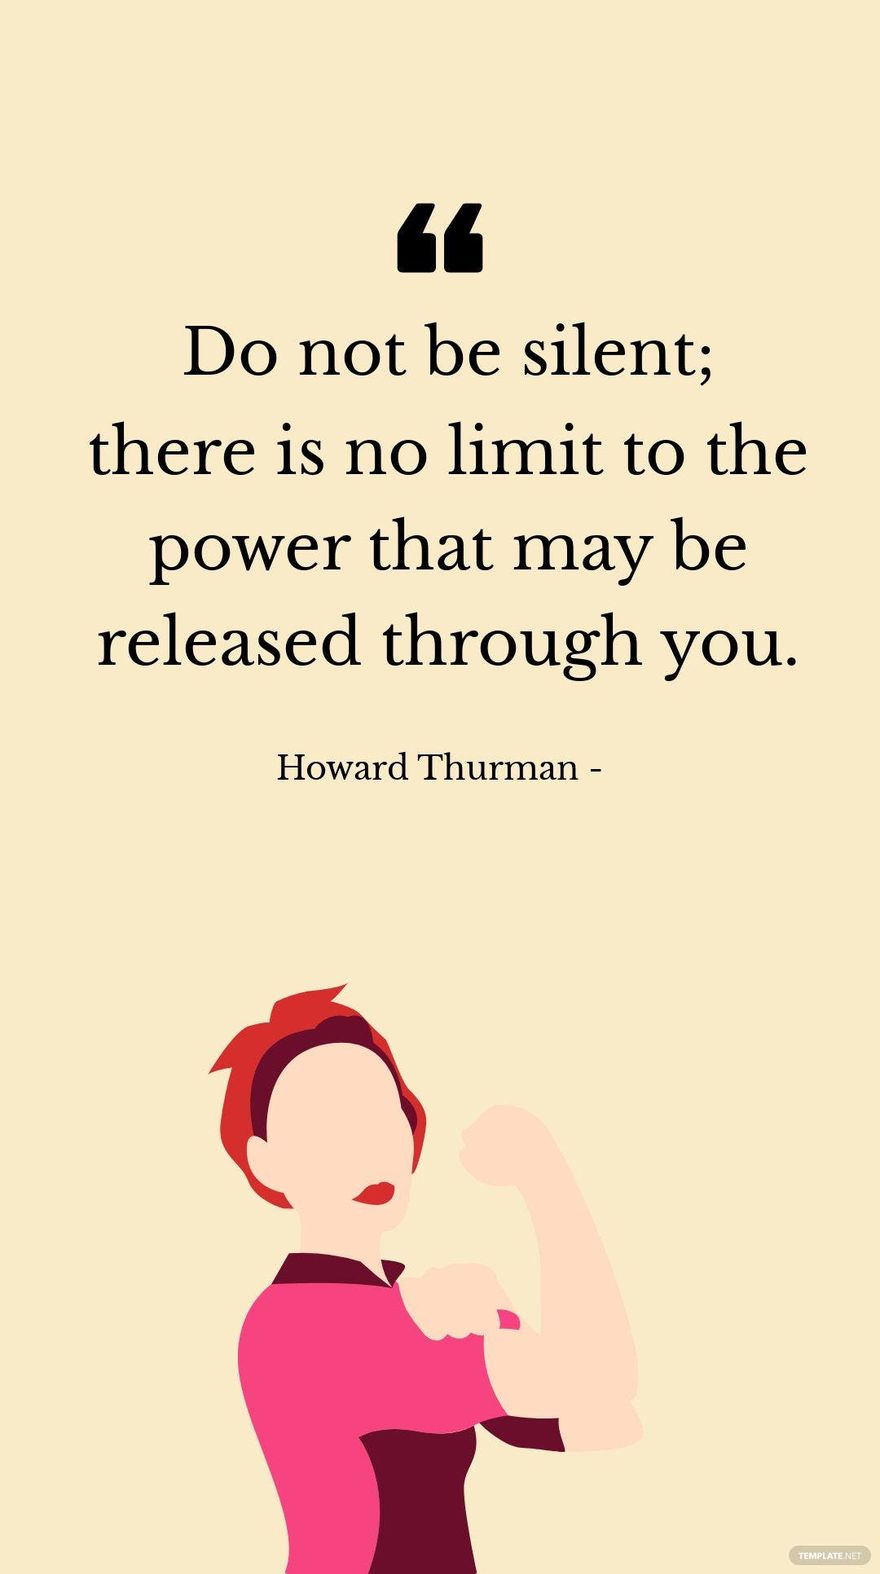 Howard Thurman - Do not be silent; there is no limit to the power that may be released through you. in JPG